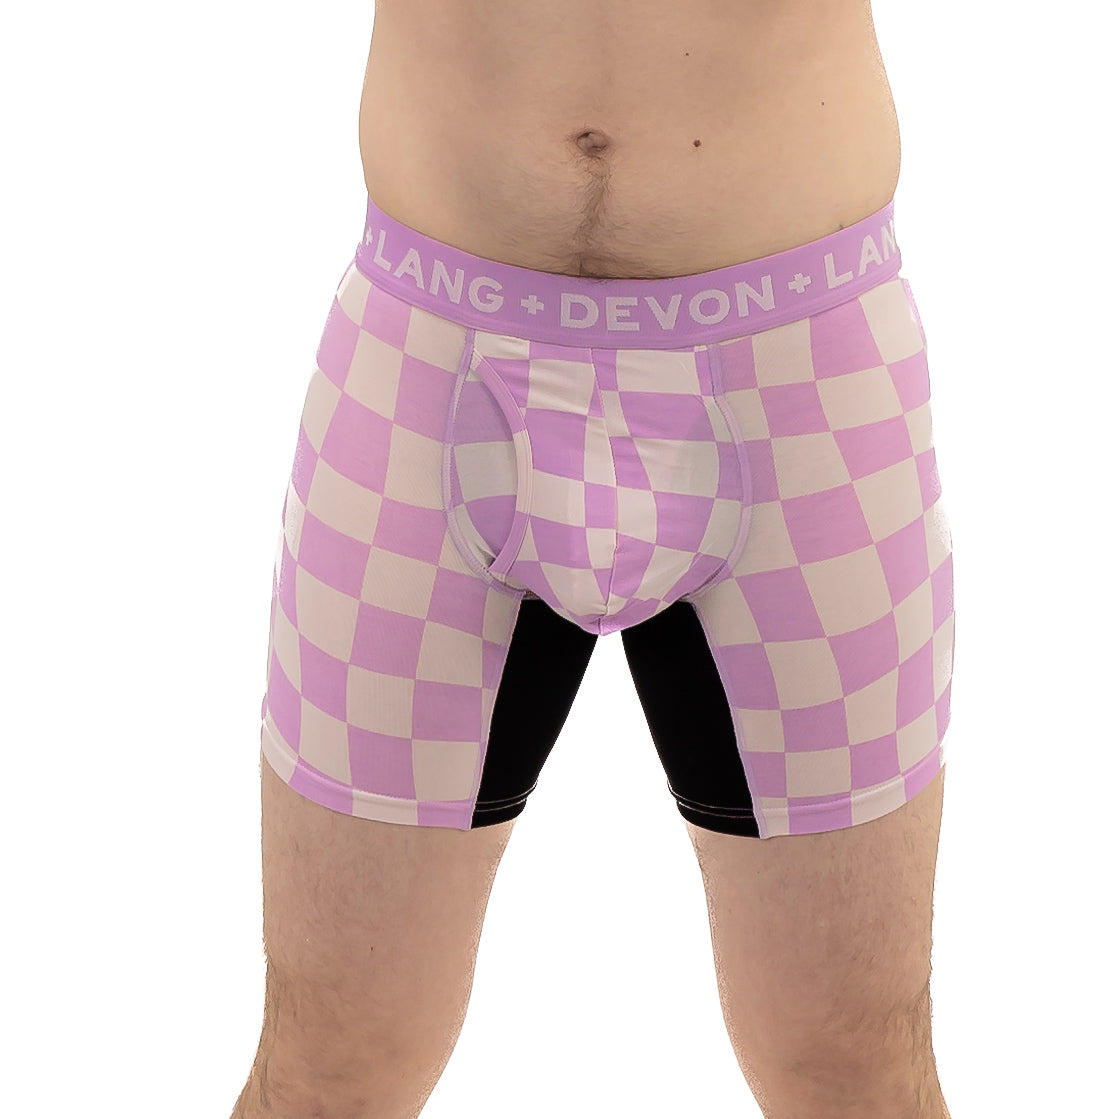 Journey Boxer Brief - Multi-Packs - Otters/Cherries/Pink Check